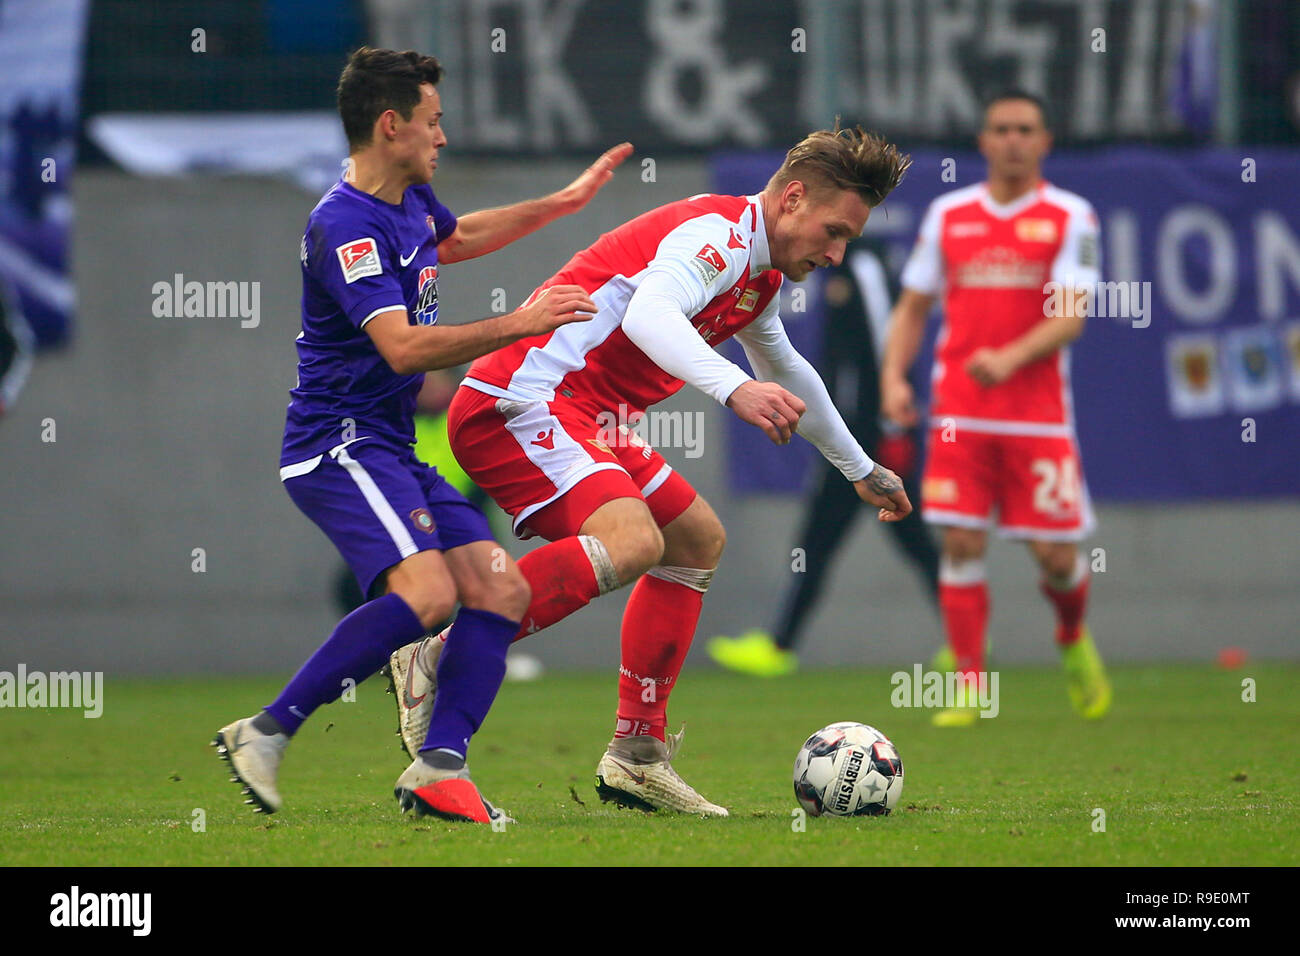 Aue, Germany. 23rd Dec, 2018. Soccer: 2nd Bundesliga, 18th matchday, FC Erzgebirge Aue - 1st FC Union Berlin in the Erzgebirgsstadion Aue. Aues Clemens Fandrich and Unions Sebastian Polter in a duel. Credit: Daniel Schäfer/dpa - IMPORTANT NOTE: In accordance with the requirements of the DFL Deutsche Fußball Liga or the DFB Deutscher Fußball-Bund, it is prohibited to use or have used photographs taken in the stadium and/or the match in the form of sequence images and/or video-like photo sequences./dpa/Alamy Live News Stock Photo